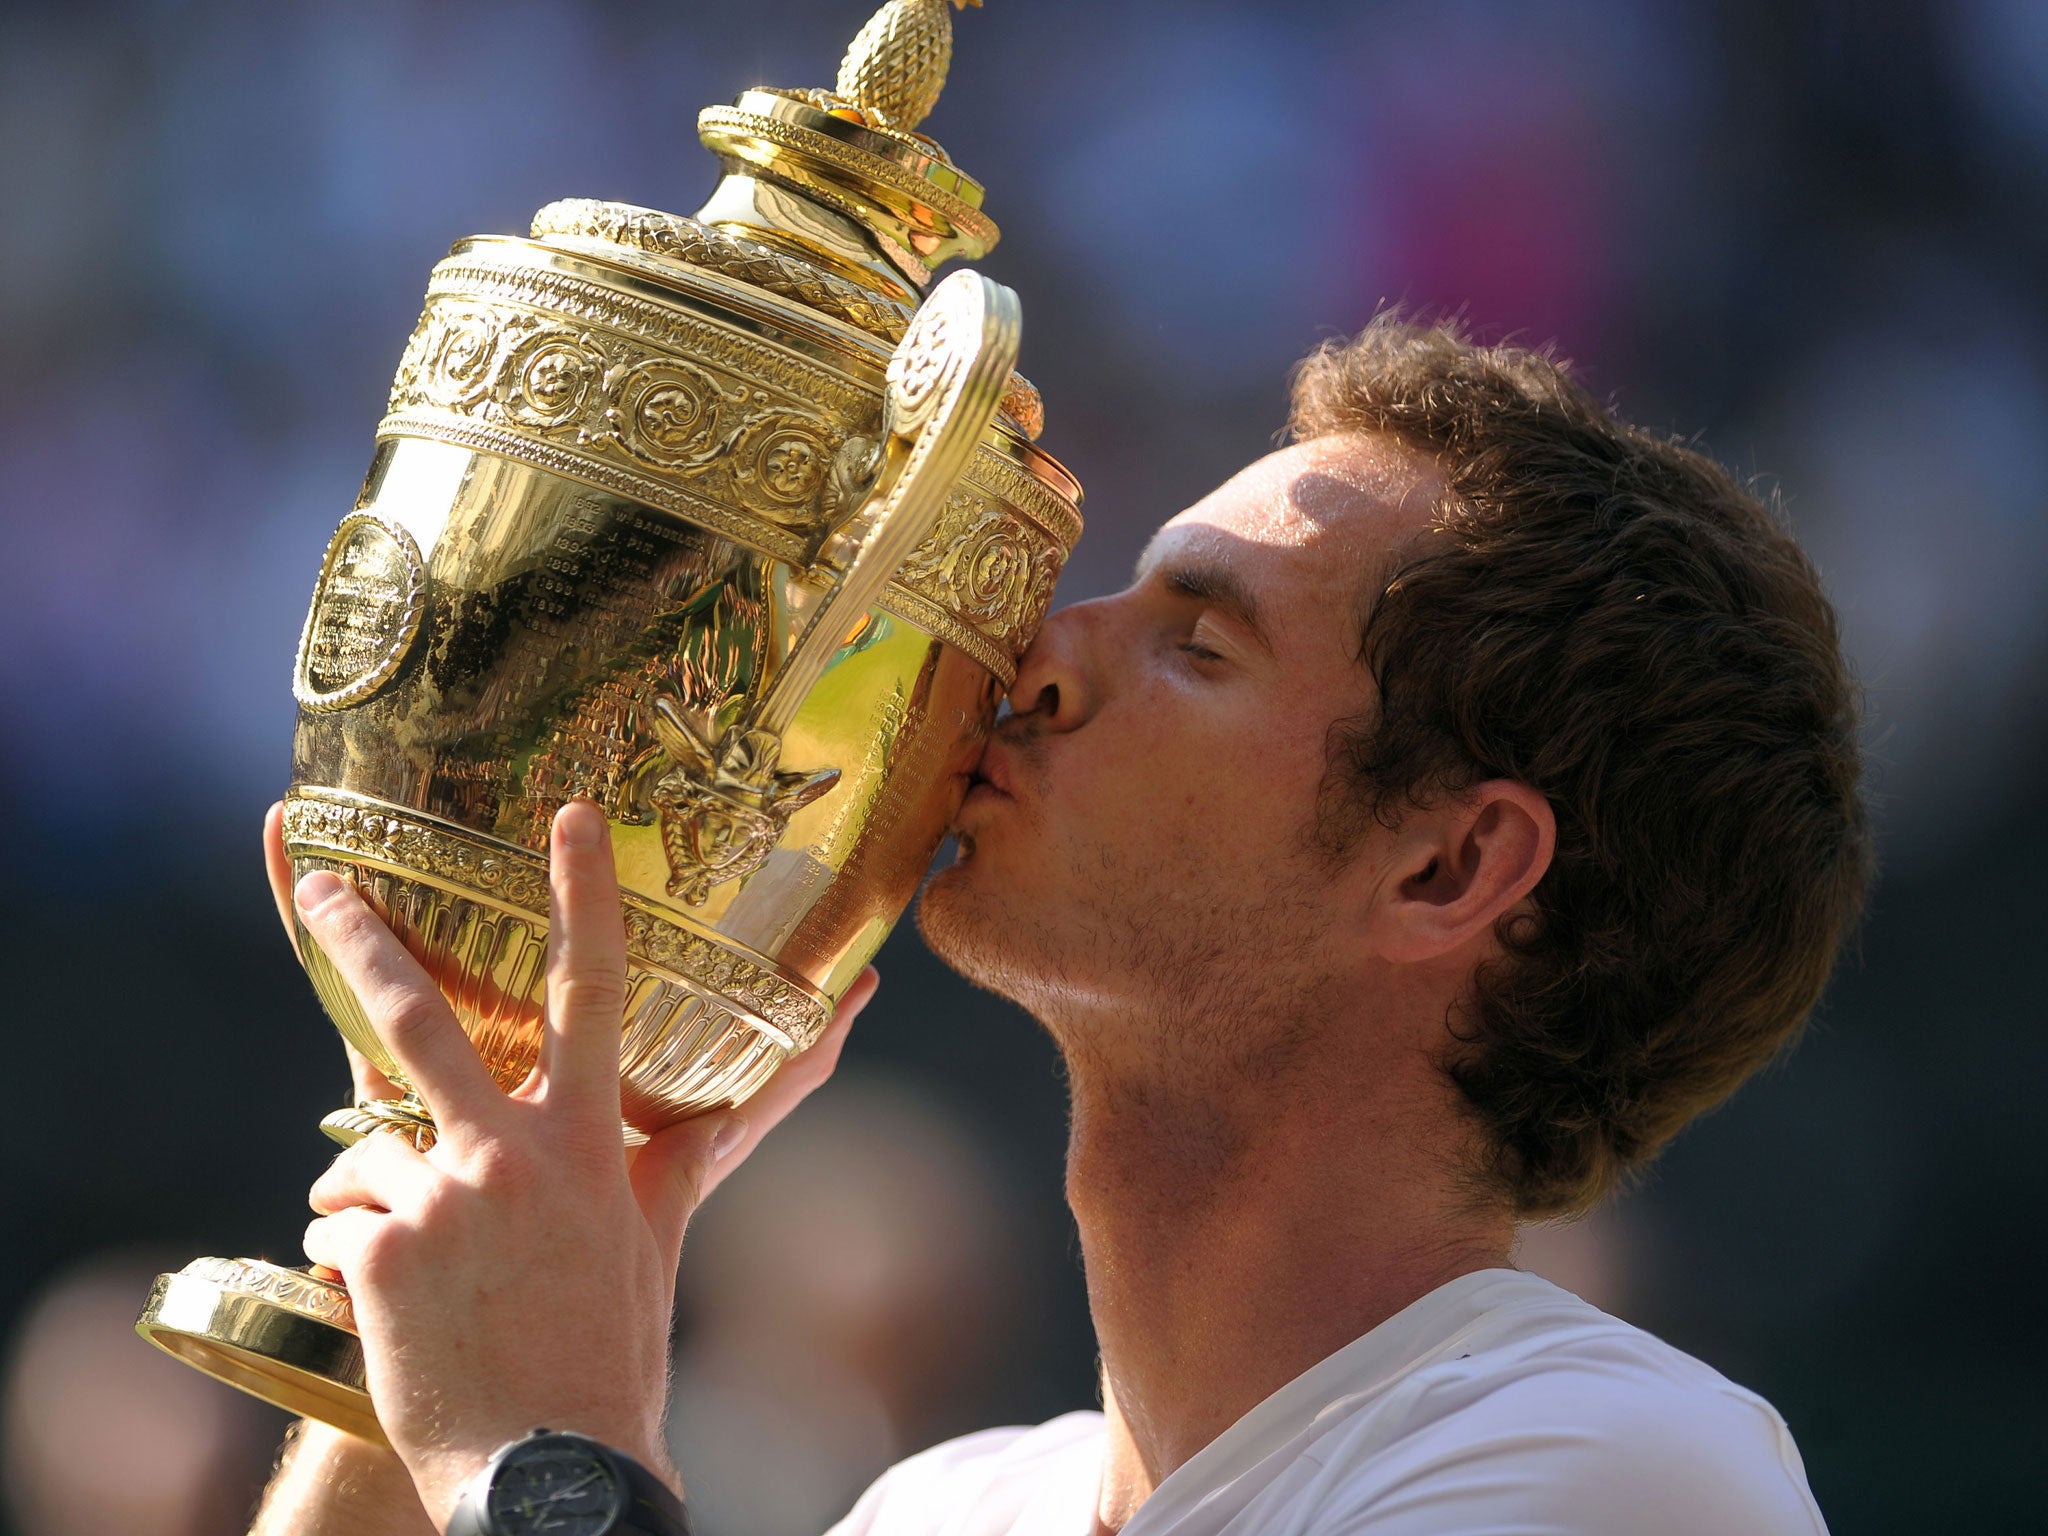 Murray became the first Briton to win the men's Wimbledon singles title since Fred Perry's 1936 triumph